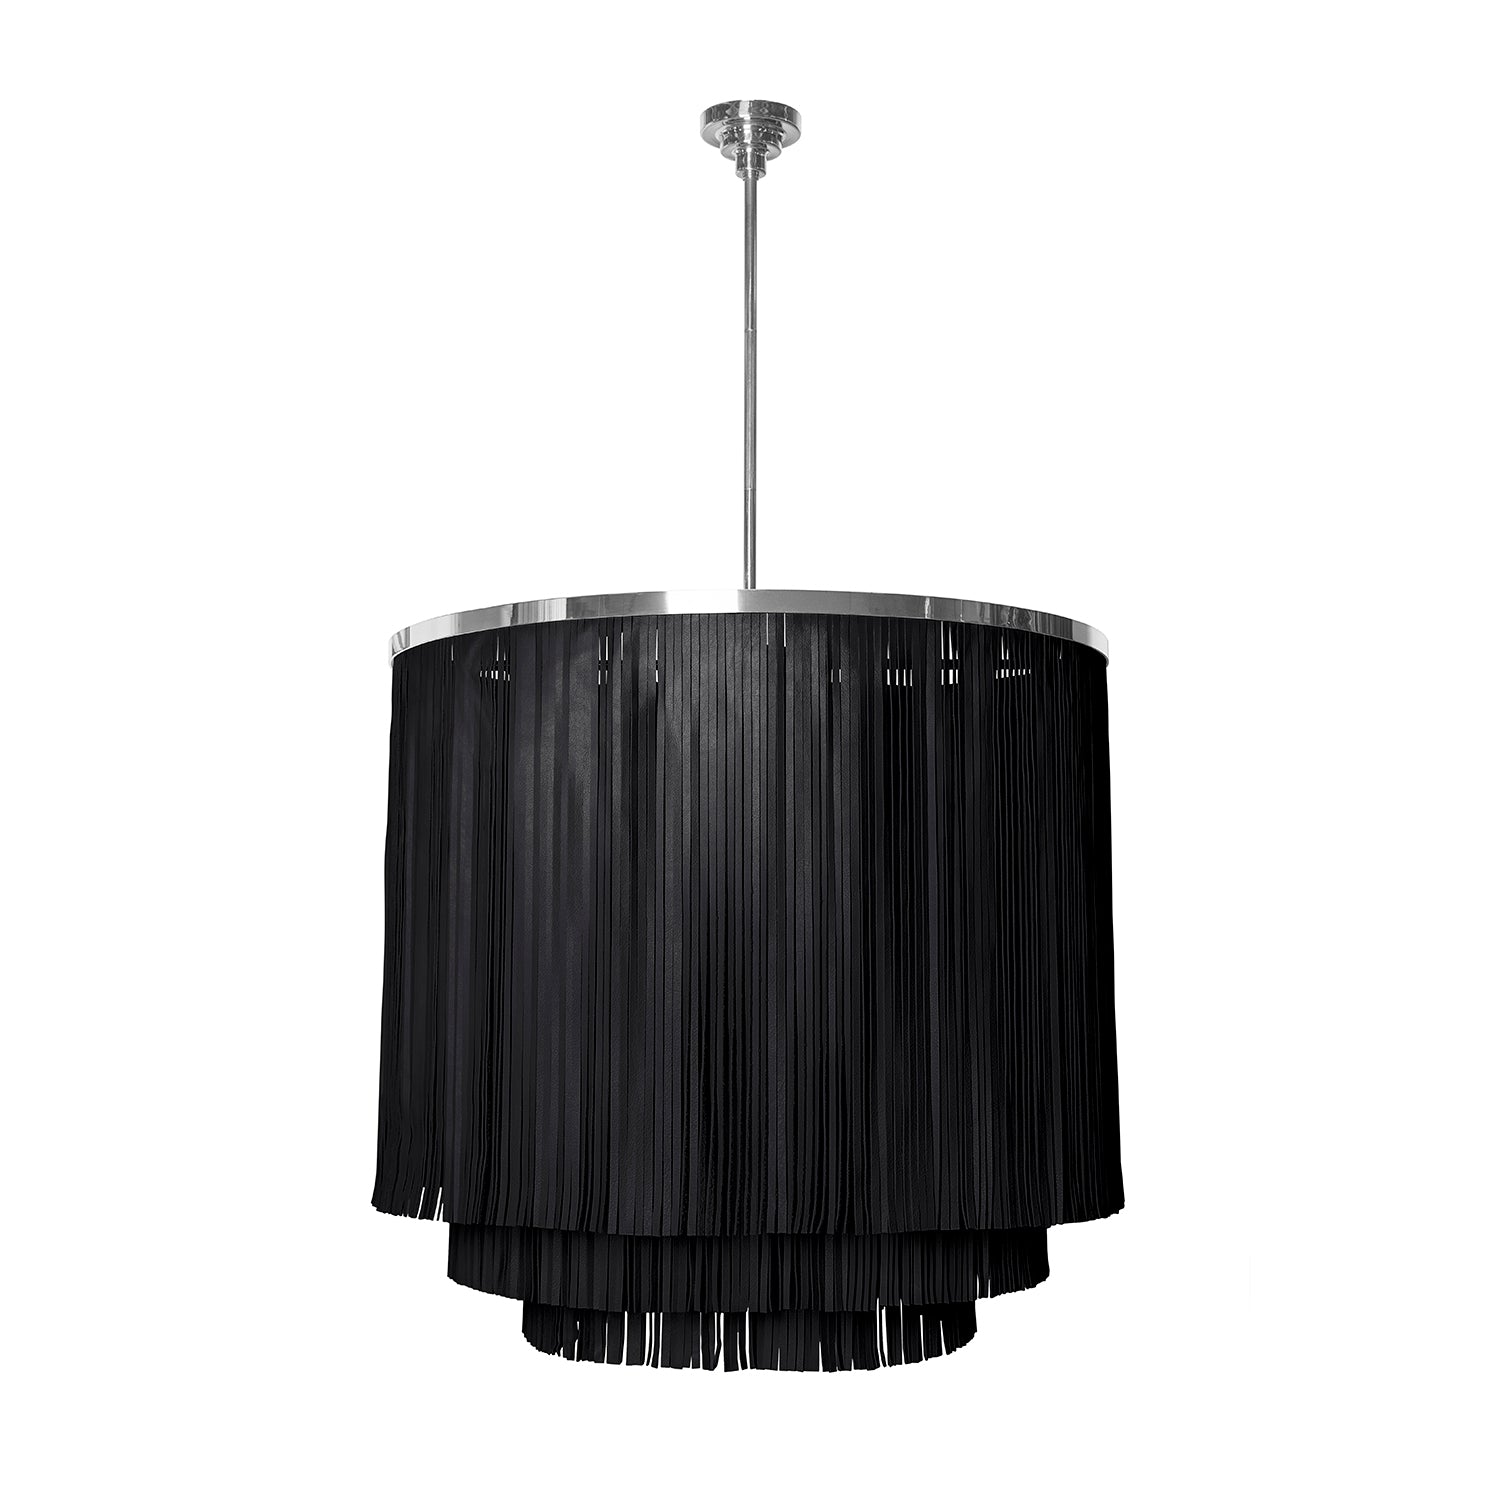 Large NeKeia Leather Chandelier in Nickel Finish and Premium Leather